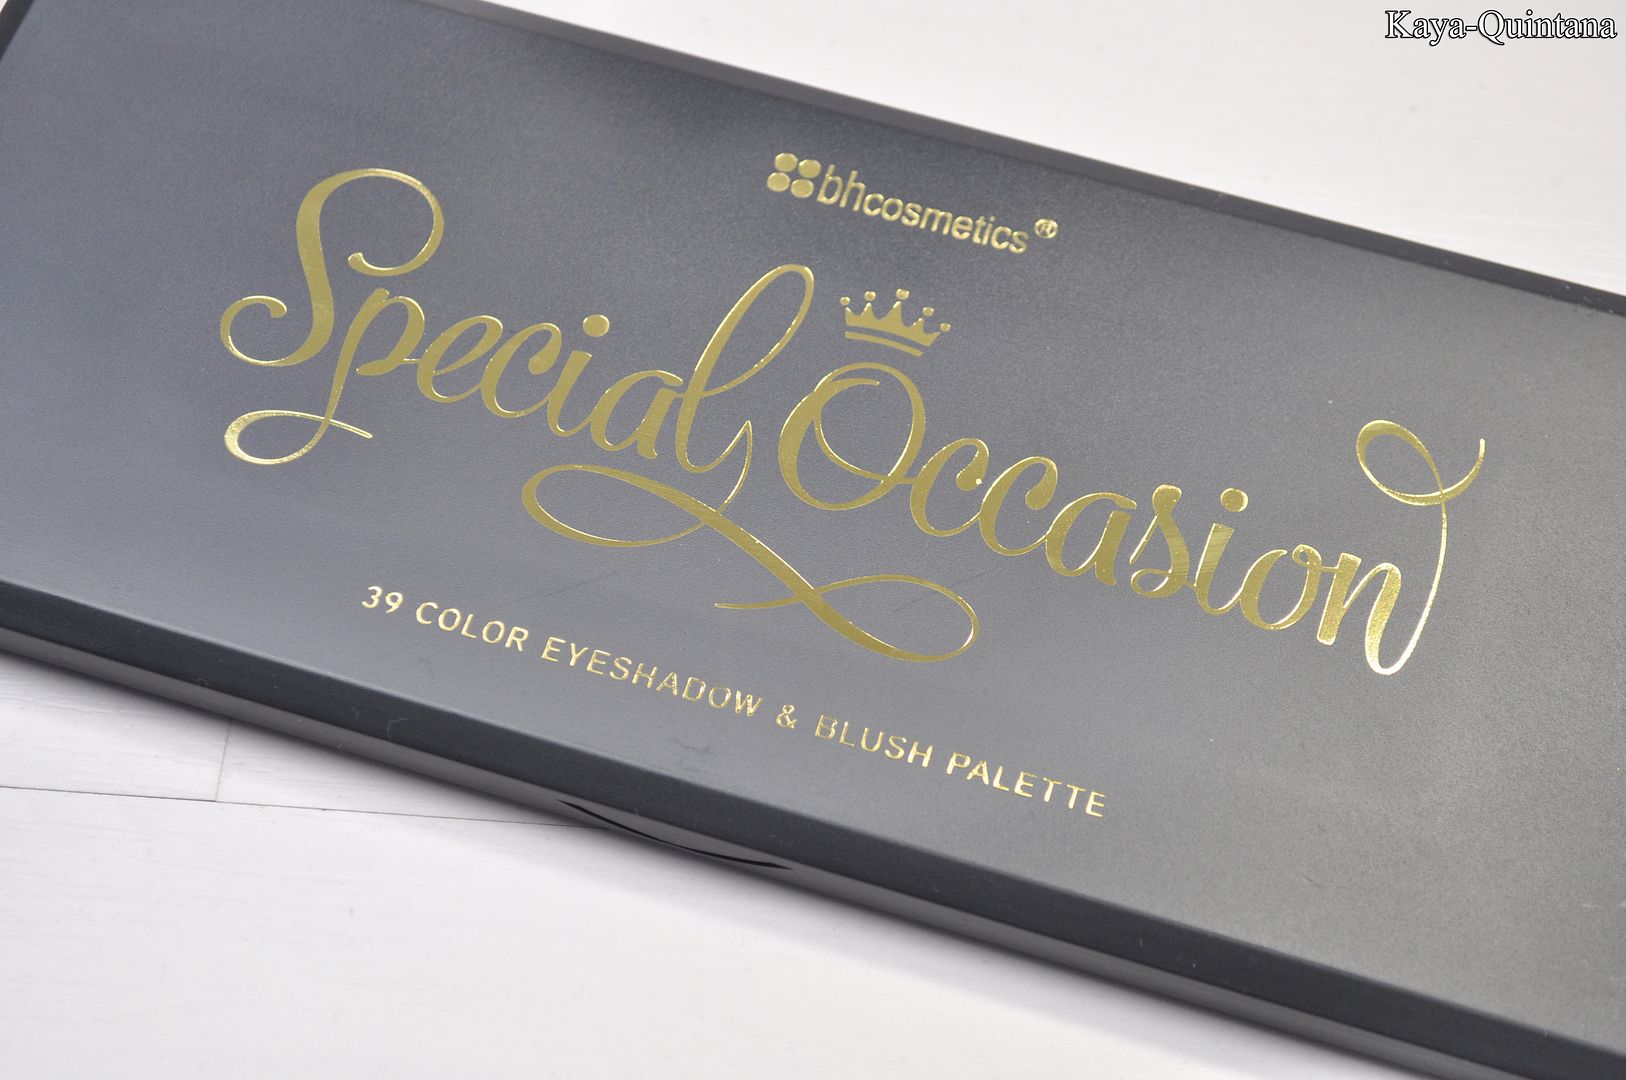 special occasion palette bh cosmetics